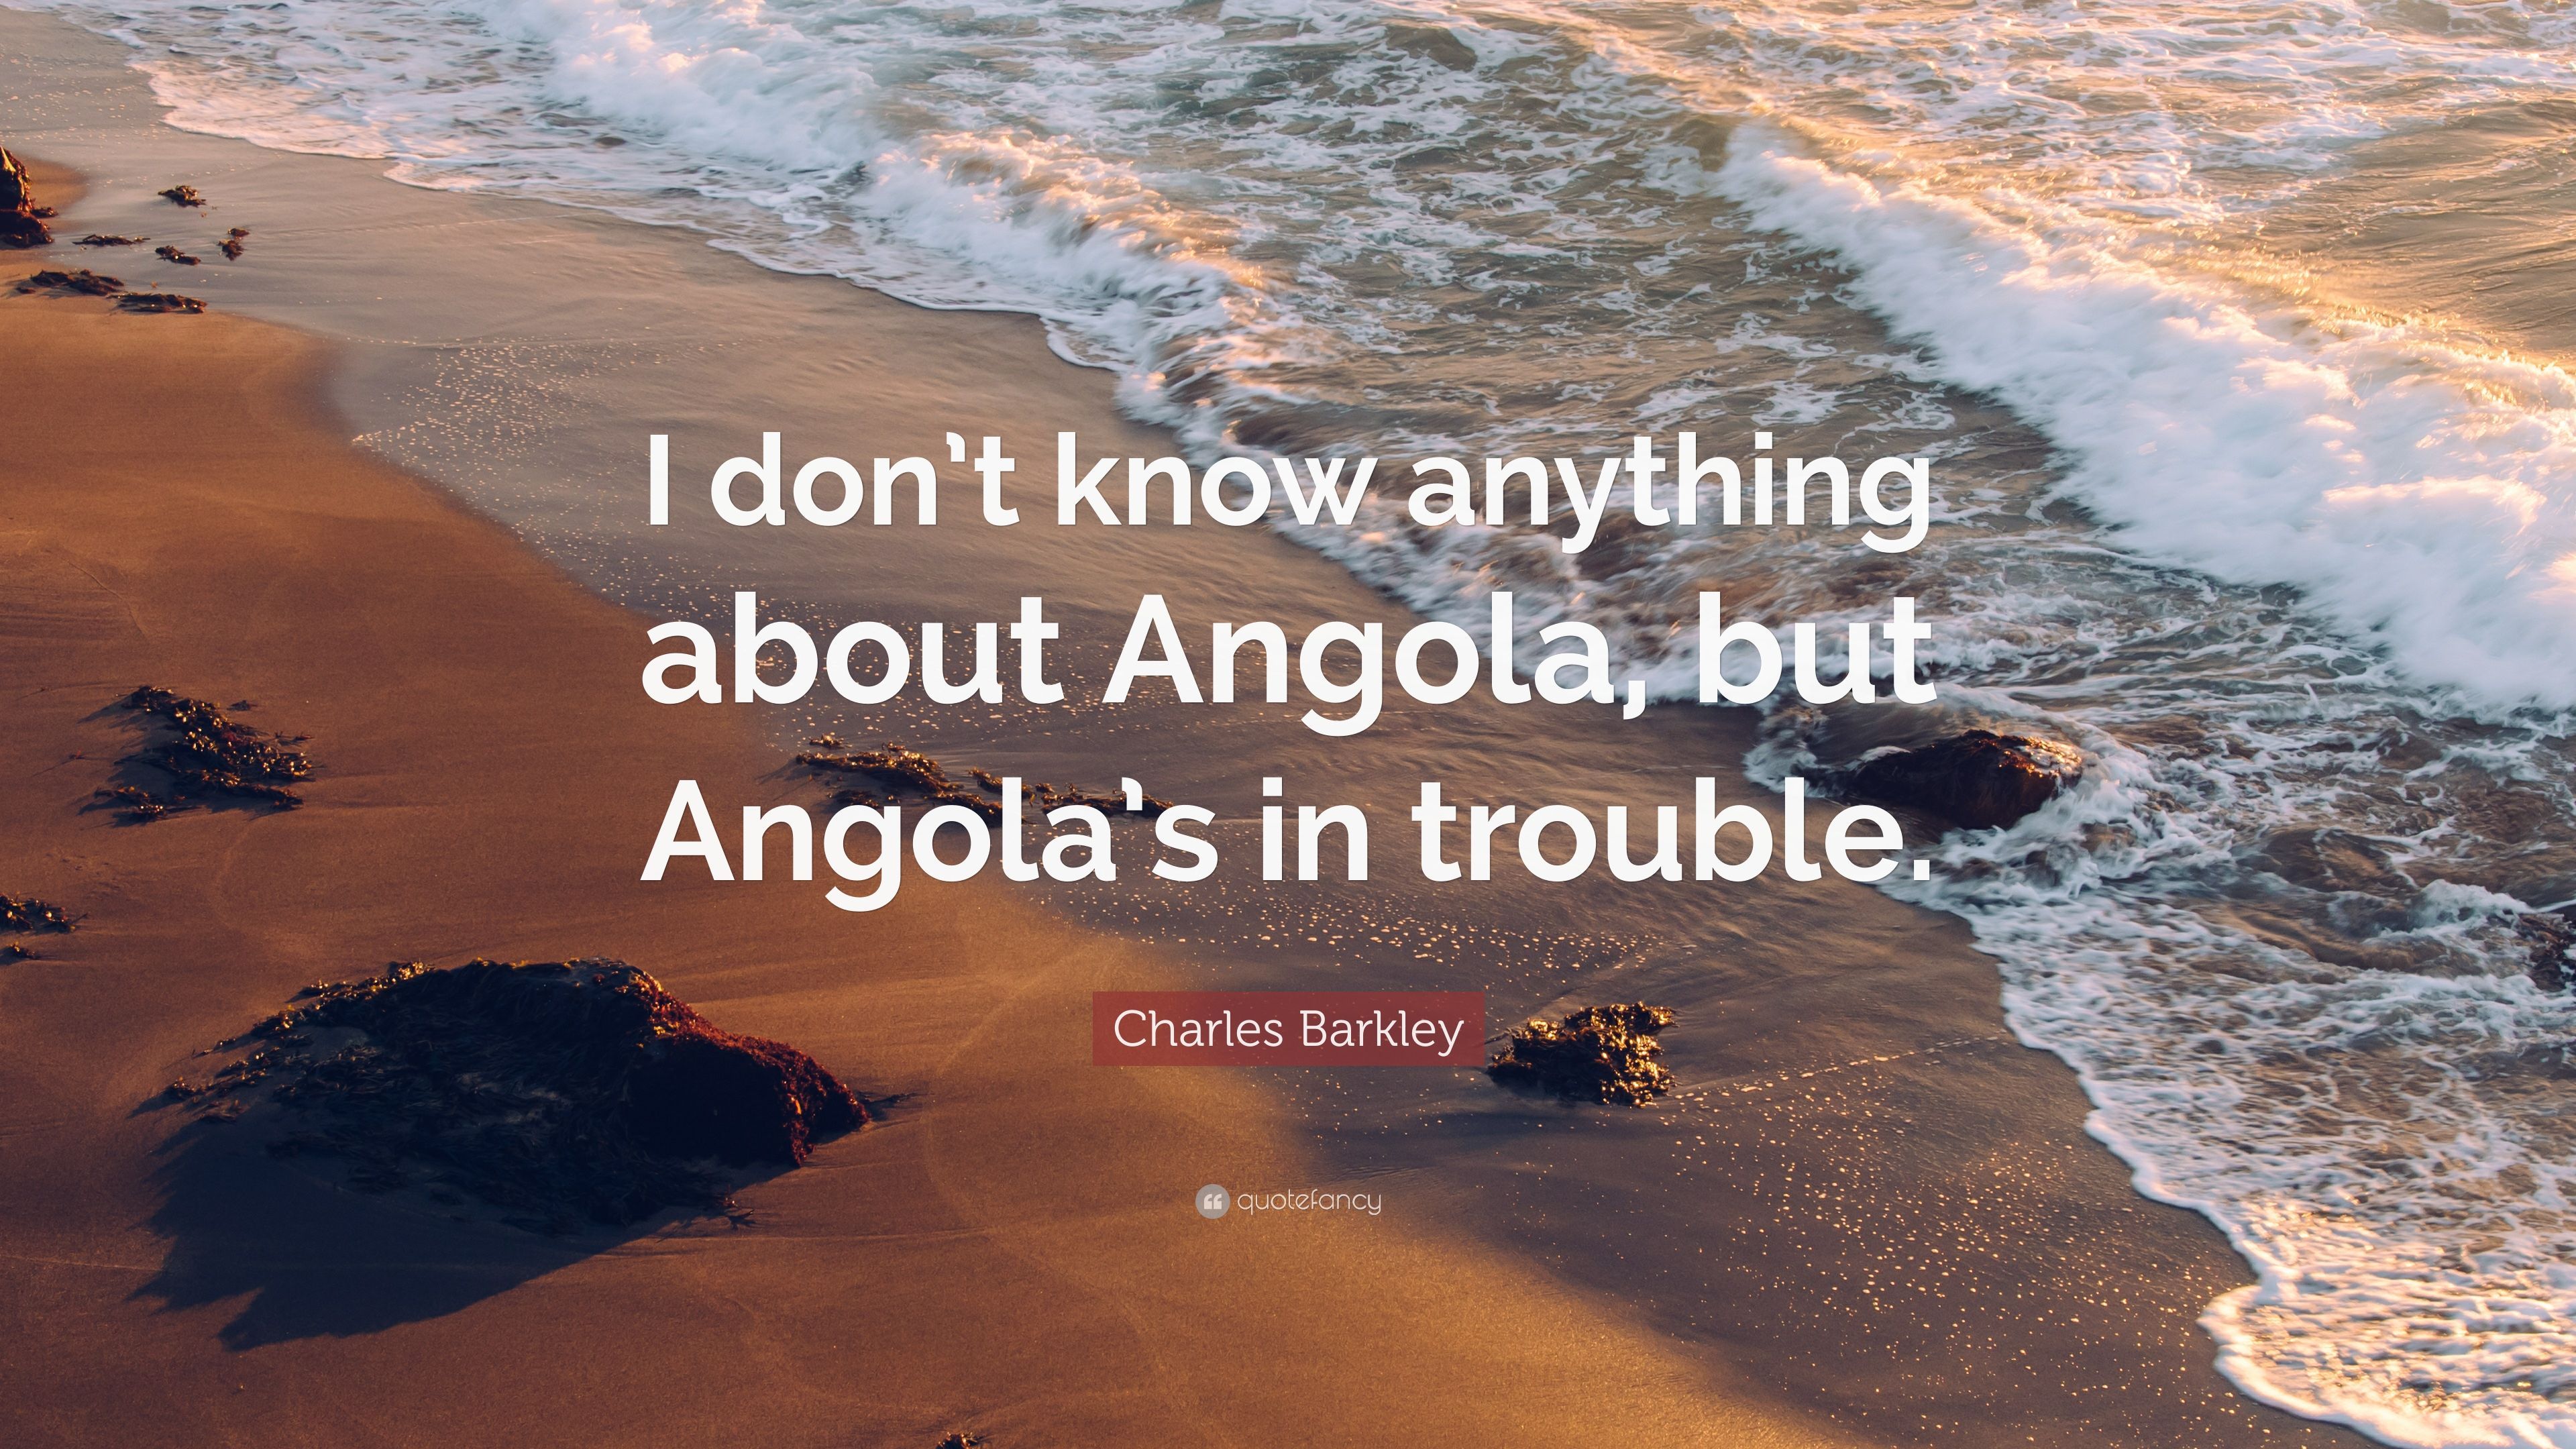 Charles Barkley Quote: “I don't know anything about Angola, but